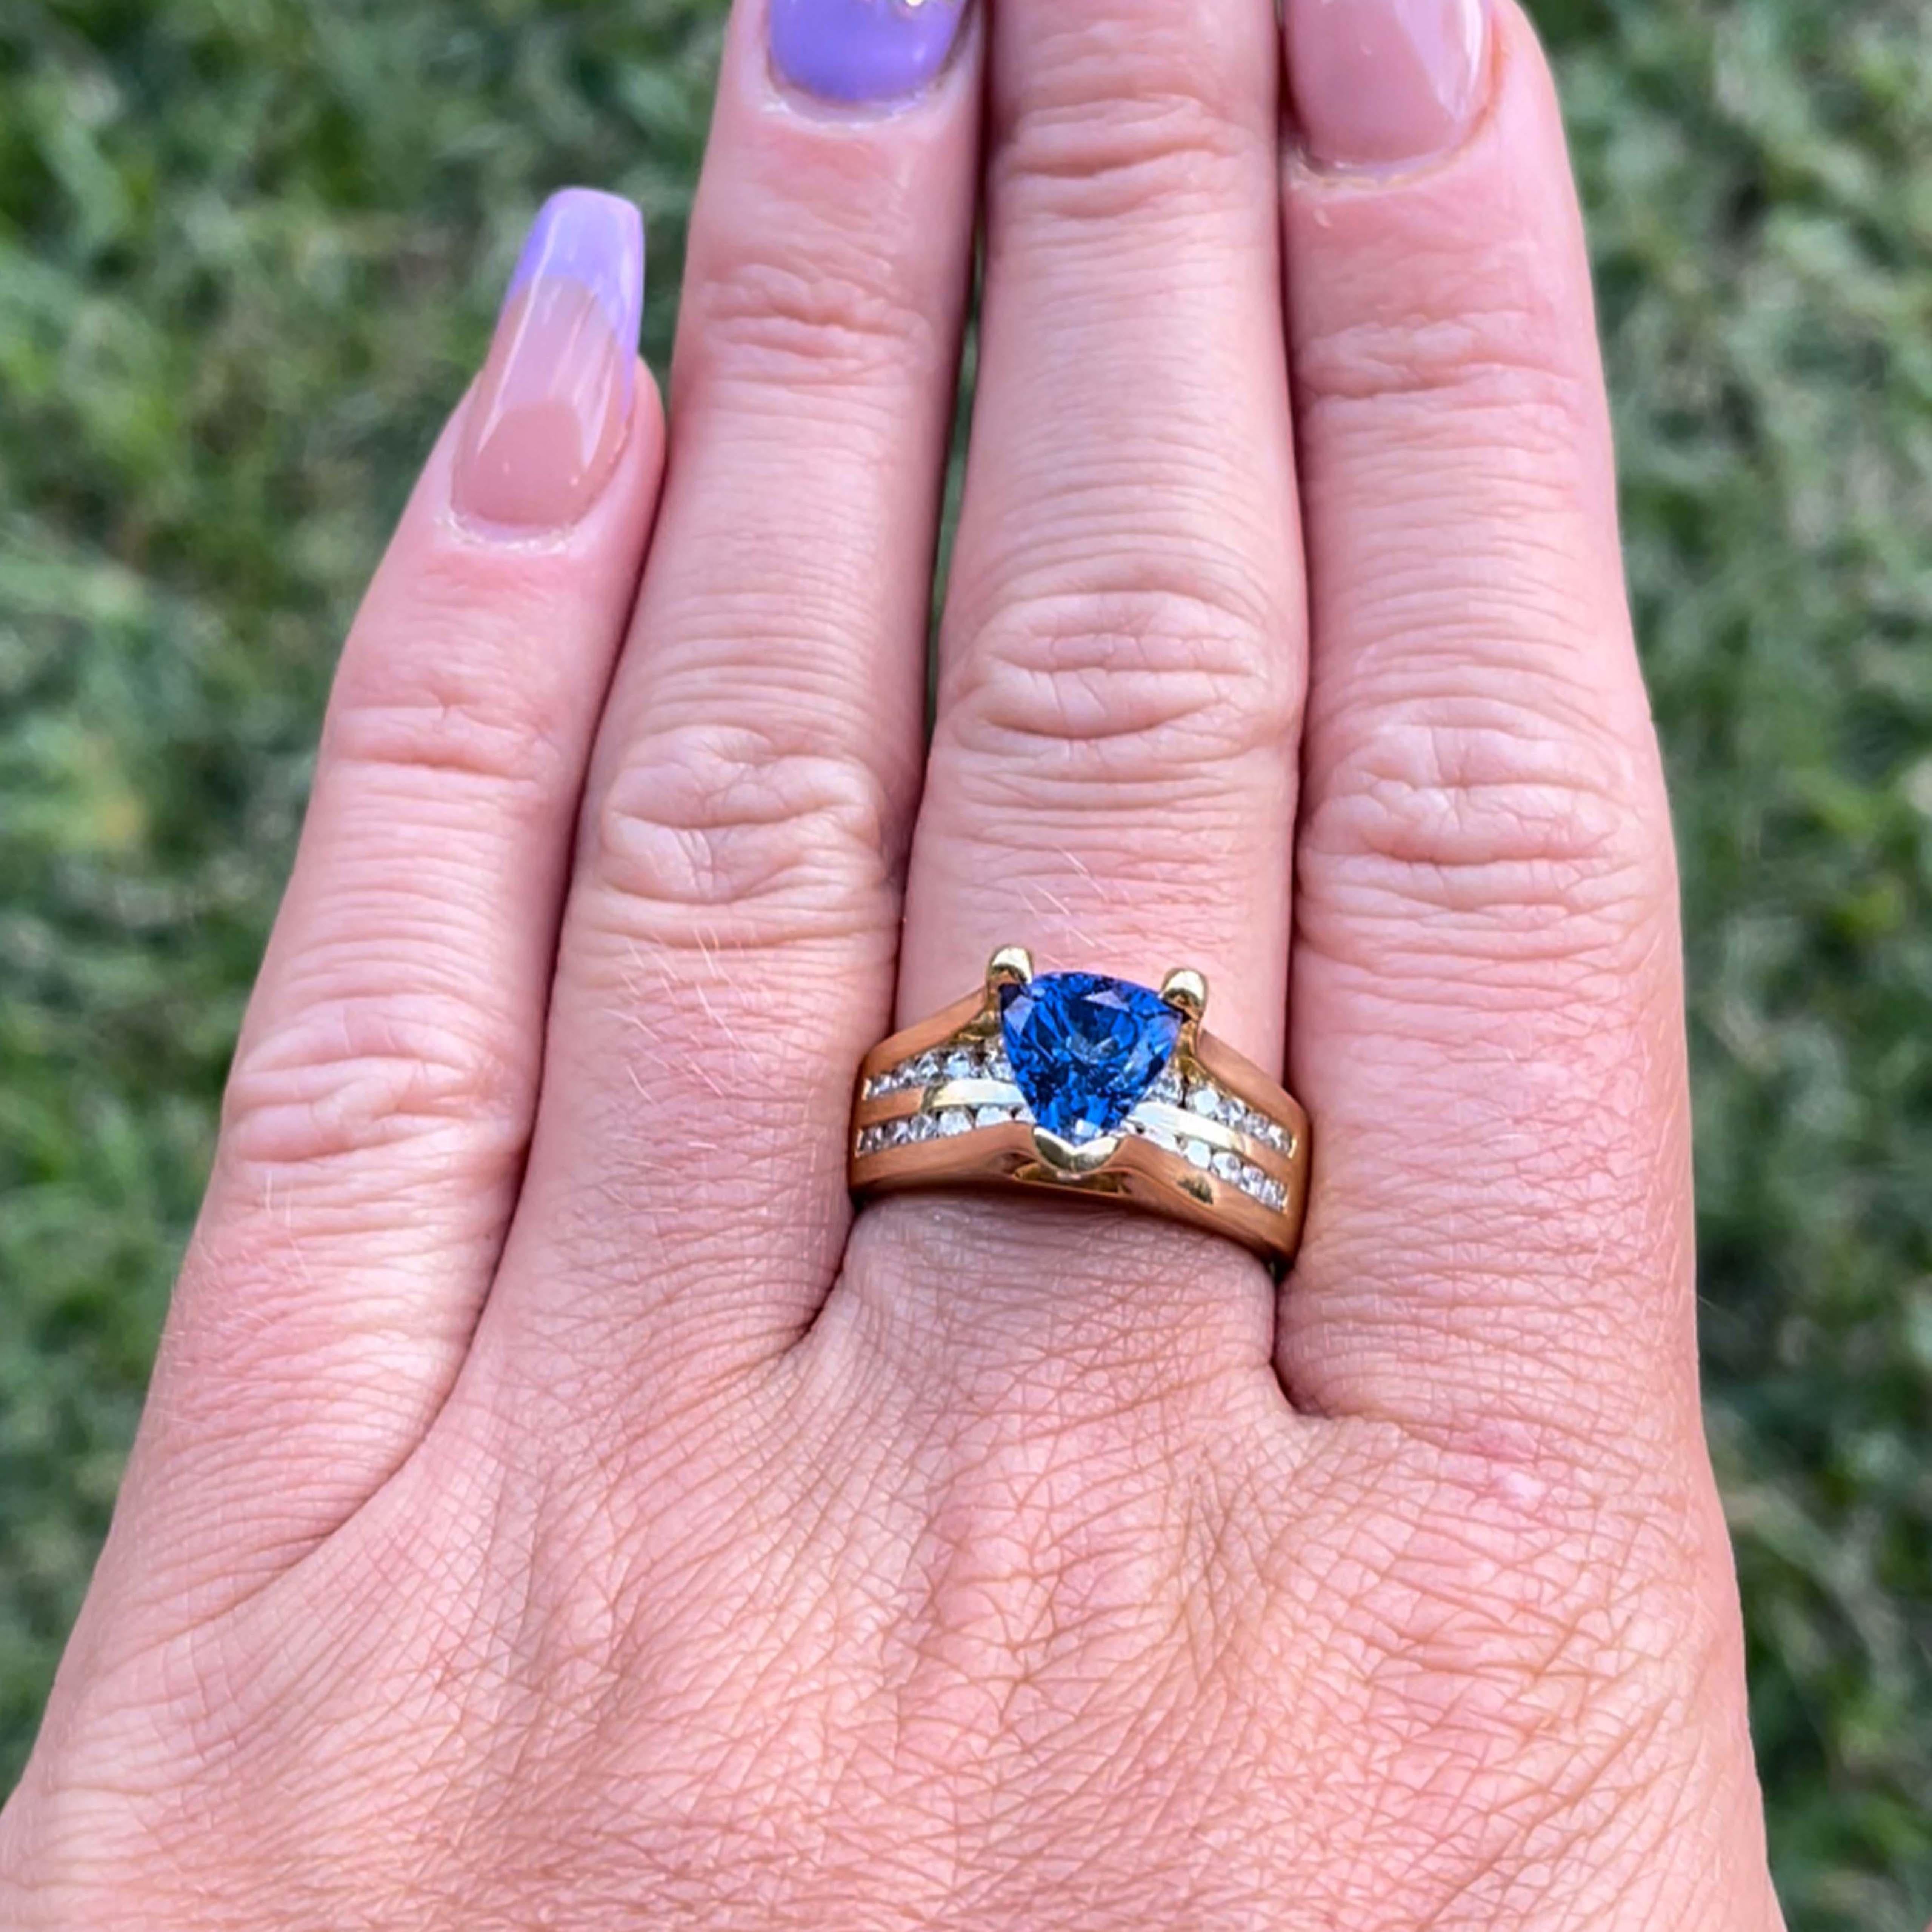 Blue Purple Tanzanite and Diamond Ring-18k Yellow Gold. Featuring a deep bluish purple color, trilliant shape Tanzanite, measuring approximately 8.50mm x 7.86mm x 6.20mm with an estimated total weight of 2.10 carats. The ring is set with 26 round